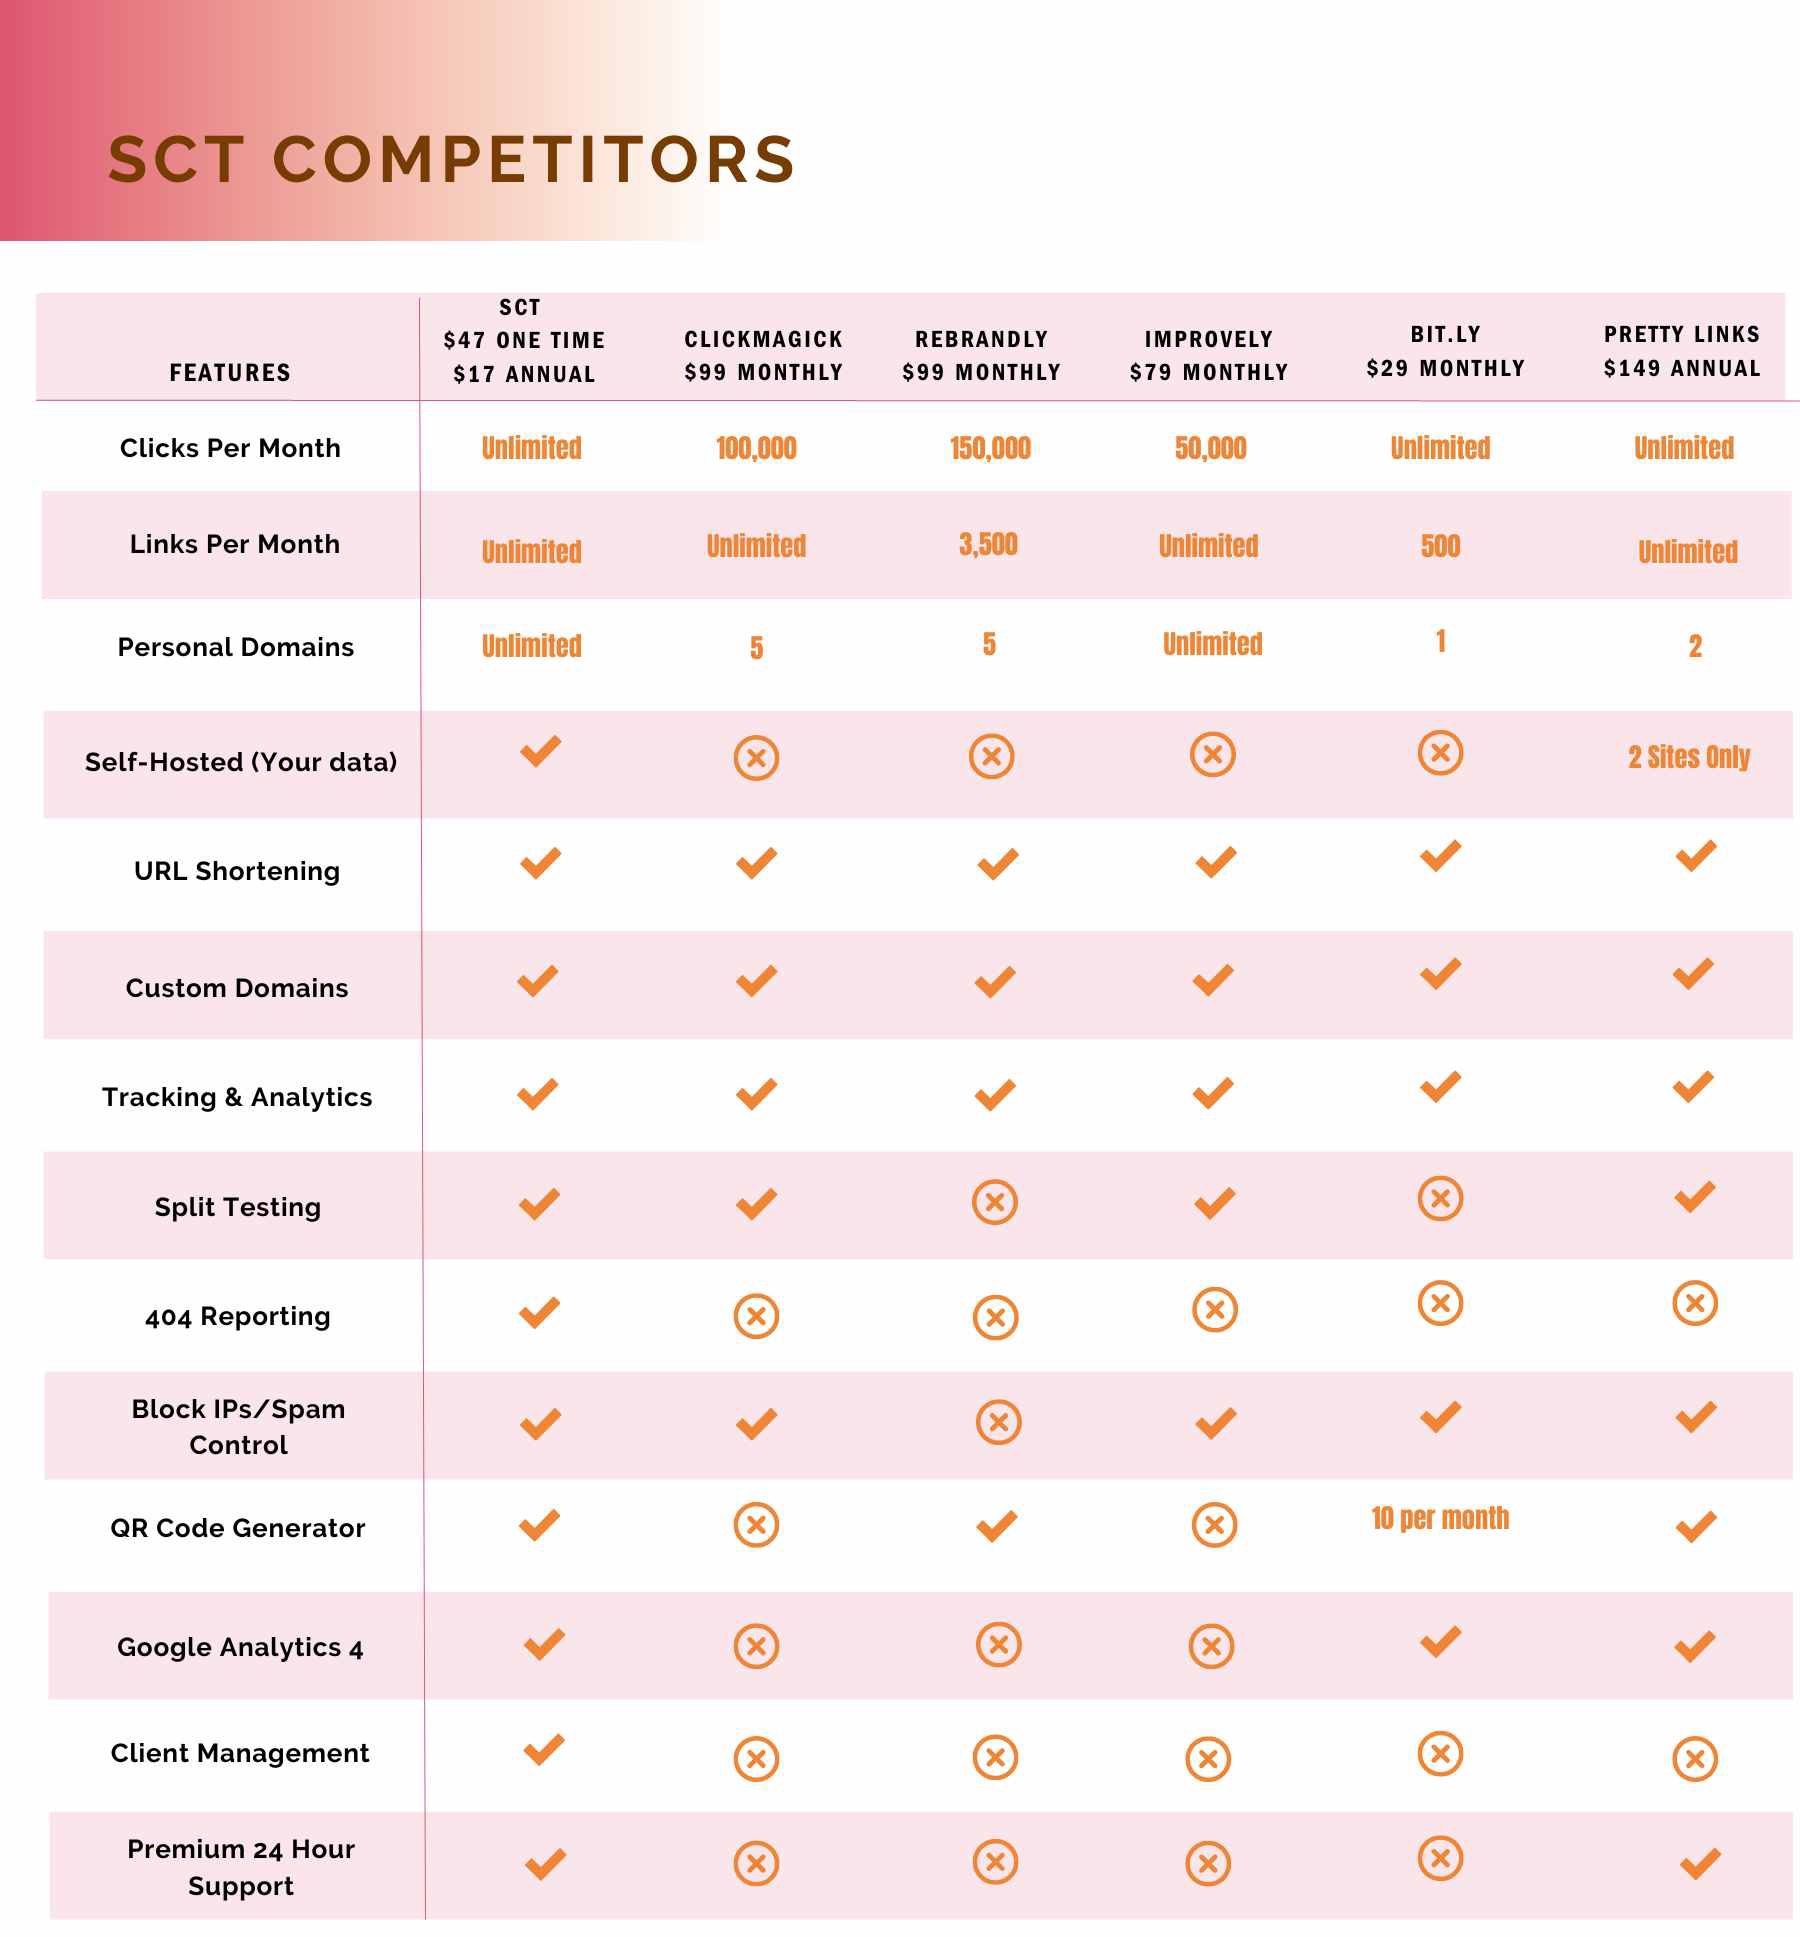 Compare SCT to the Top Redirect tools